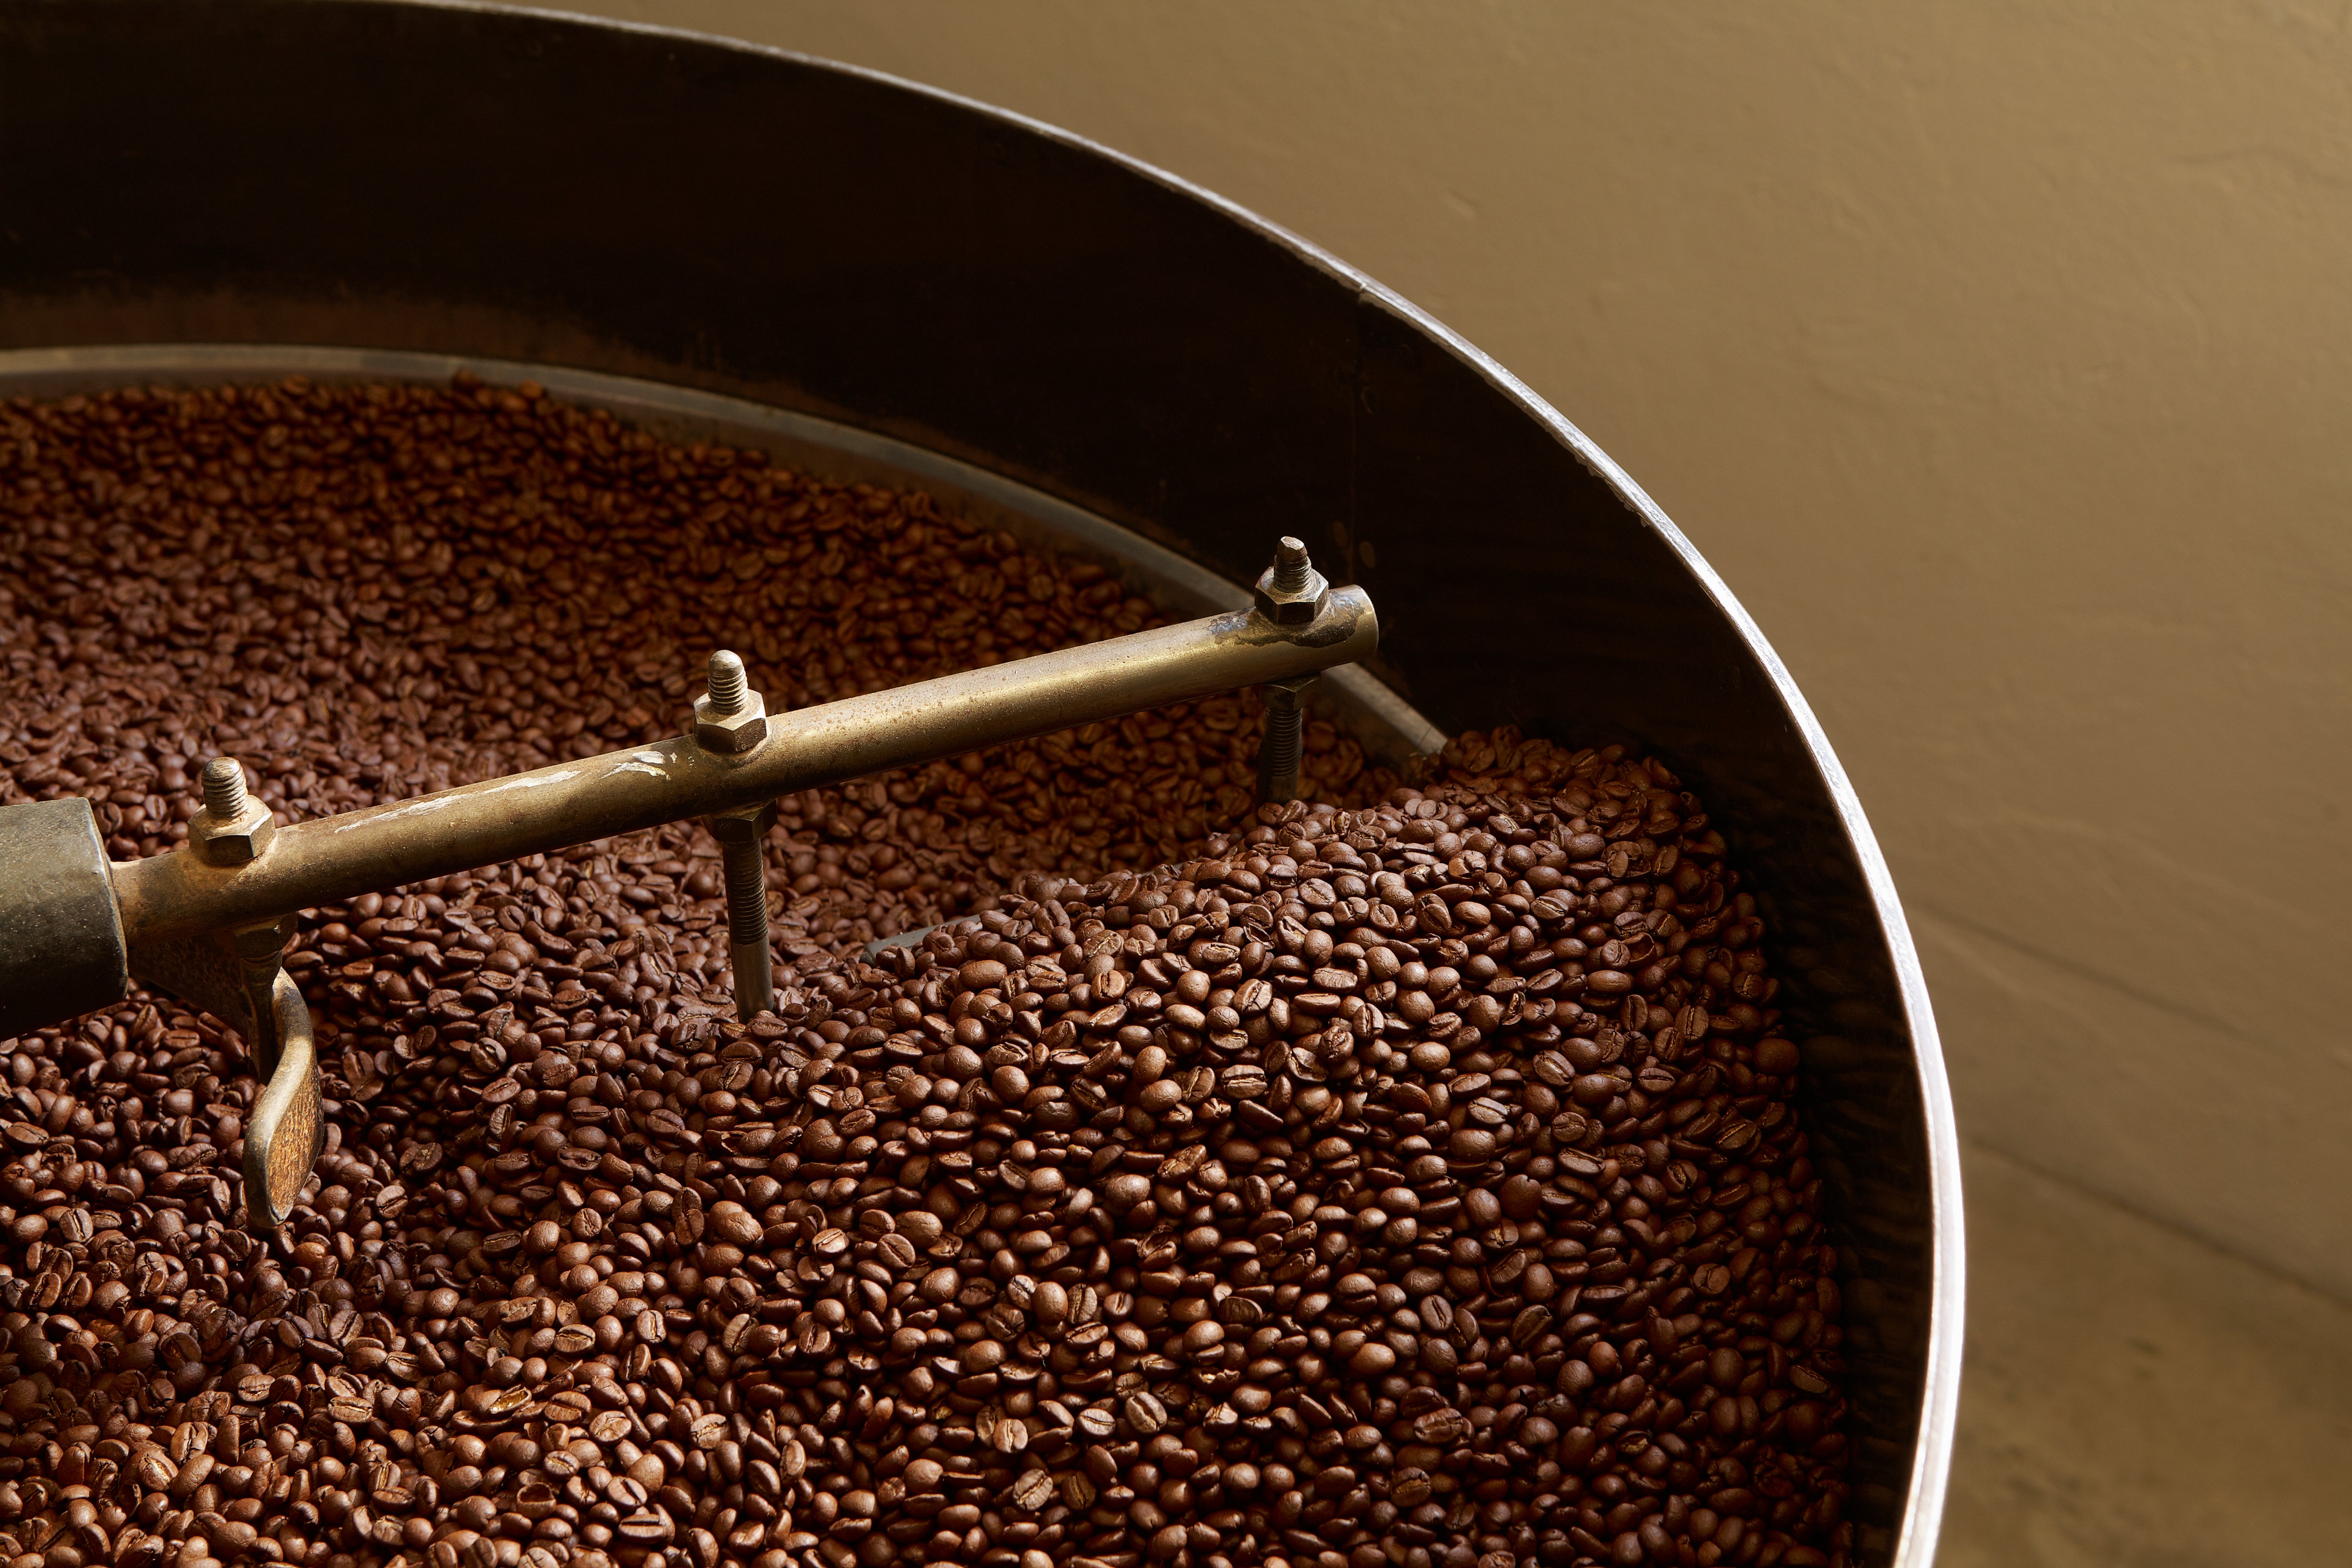 Why are coffee beans roasted?